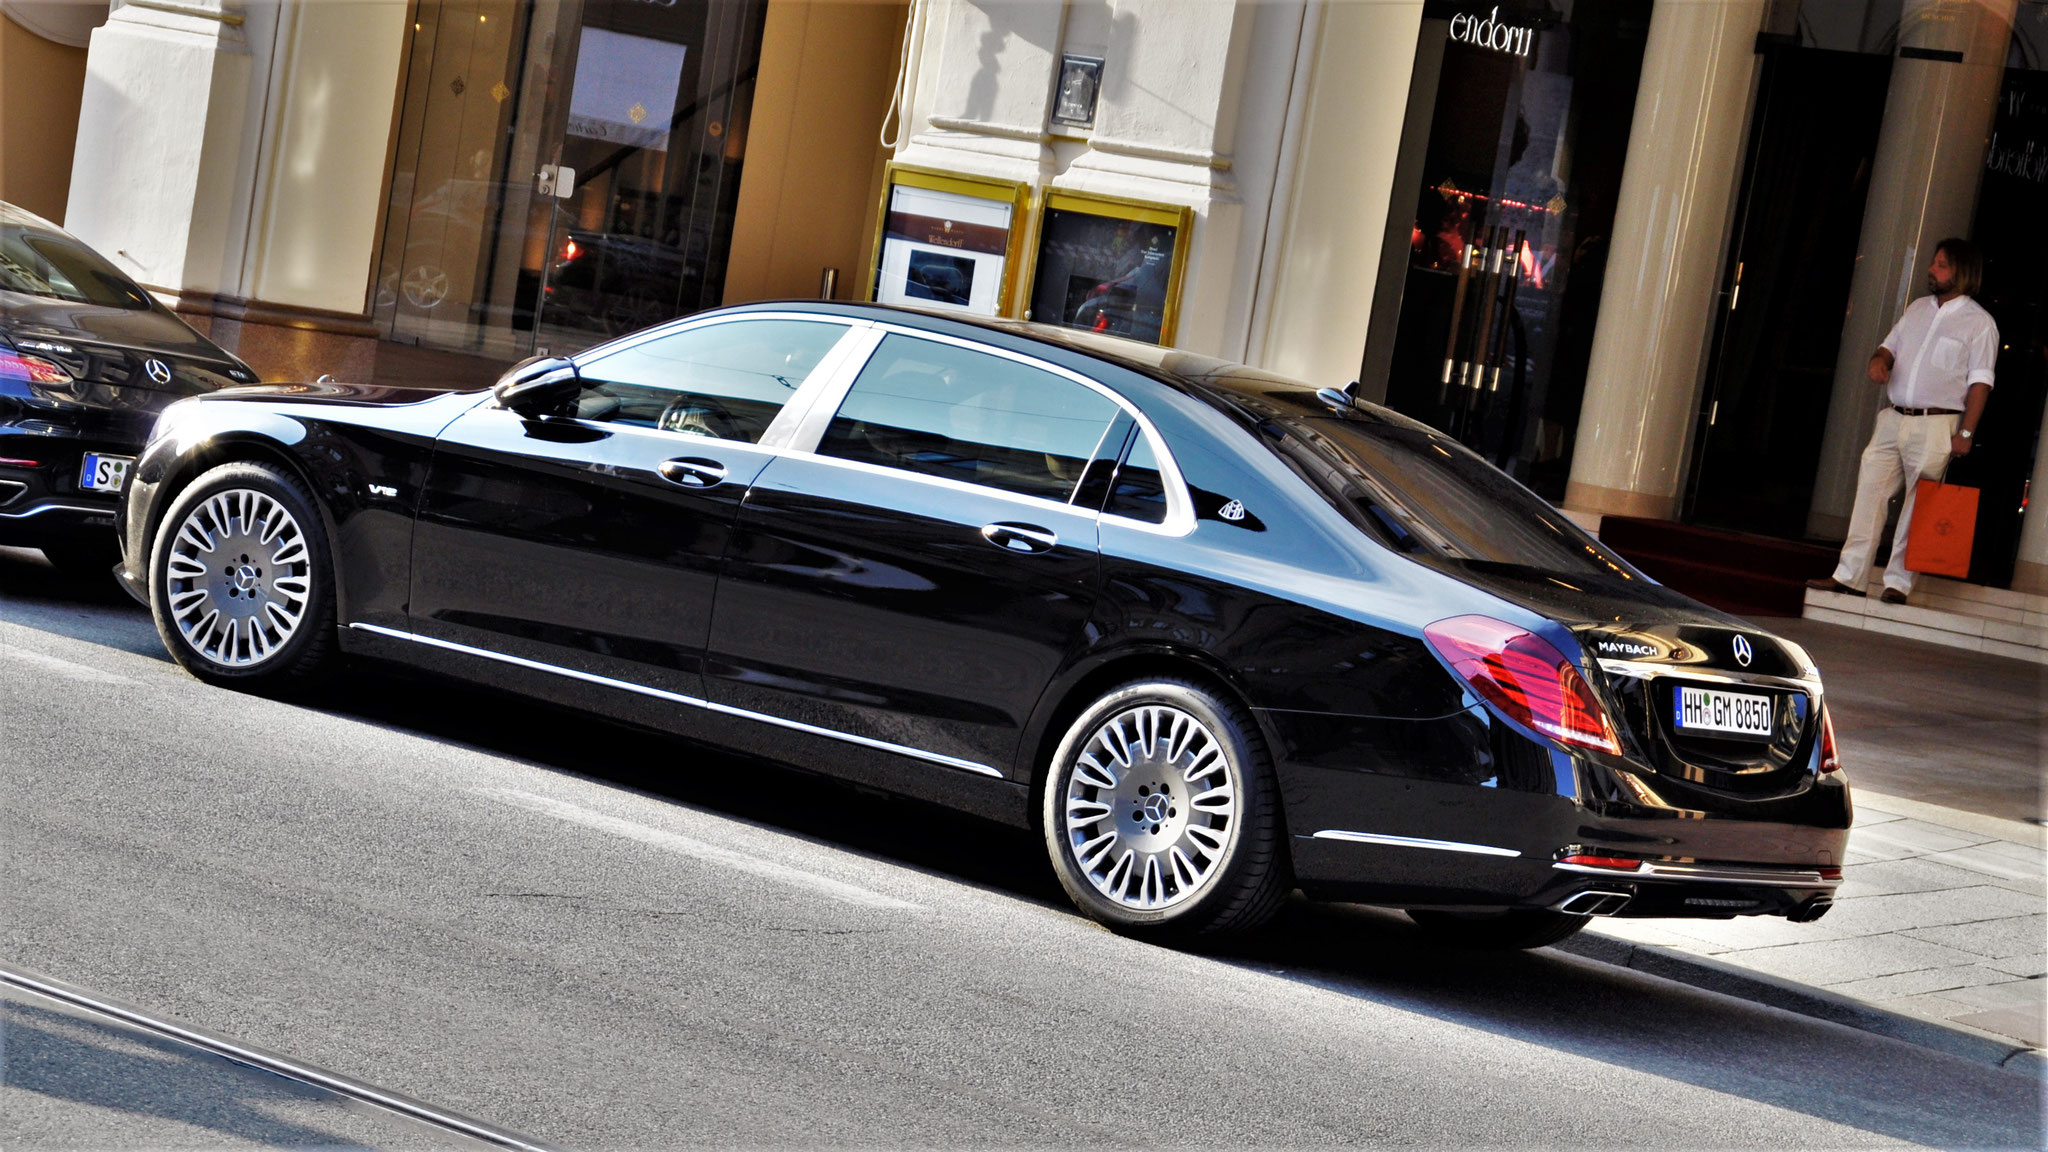 Mercedes Maybach S600 - HH-GM8850